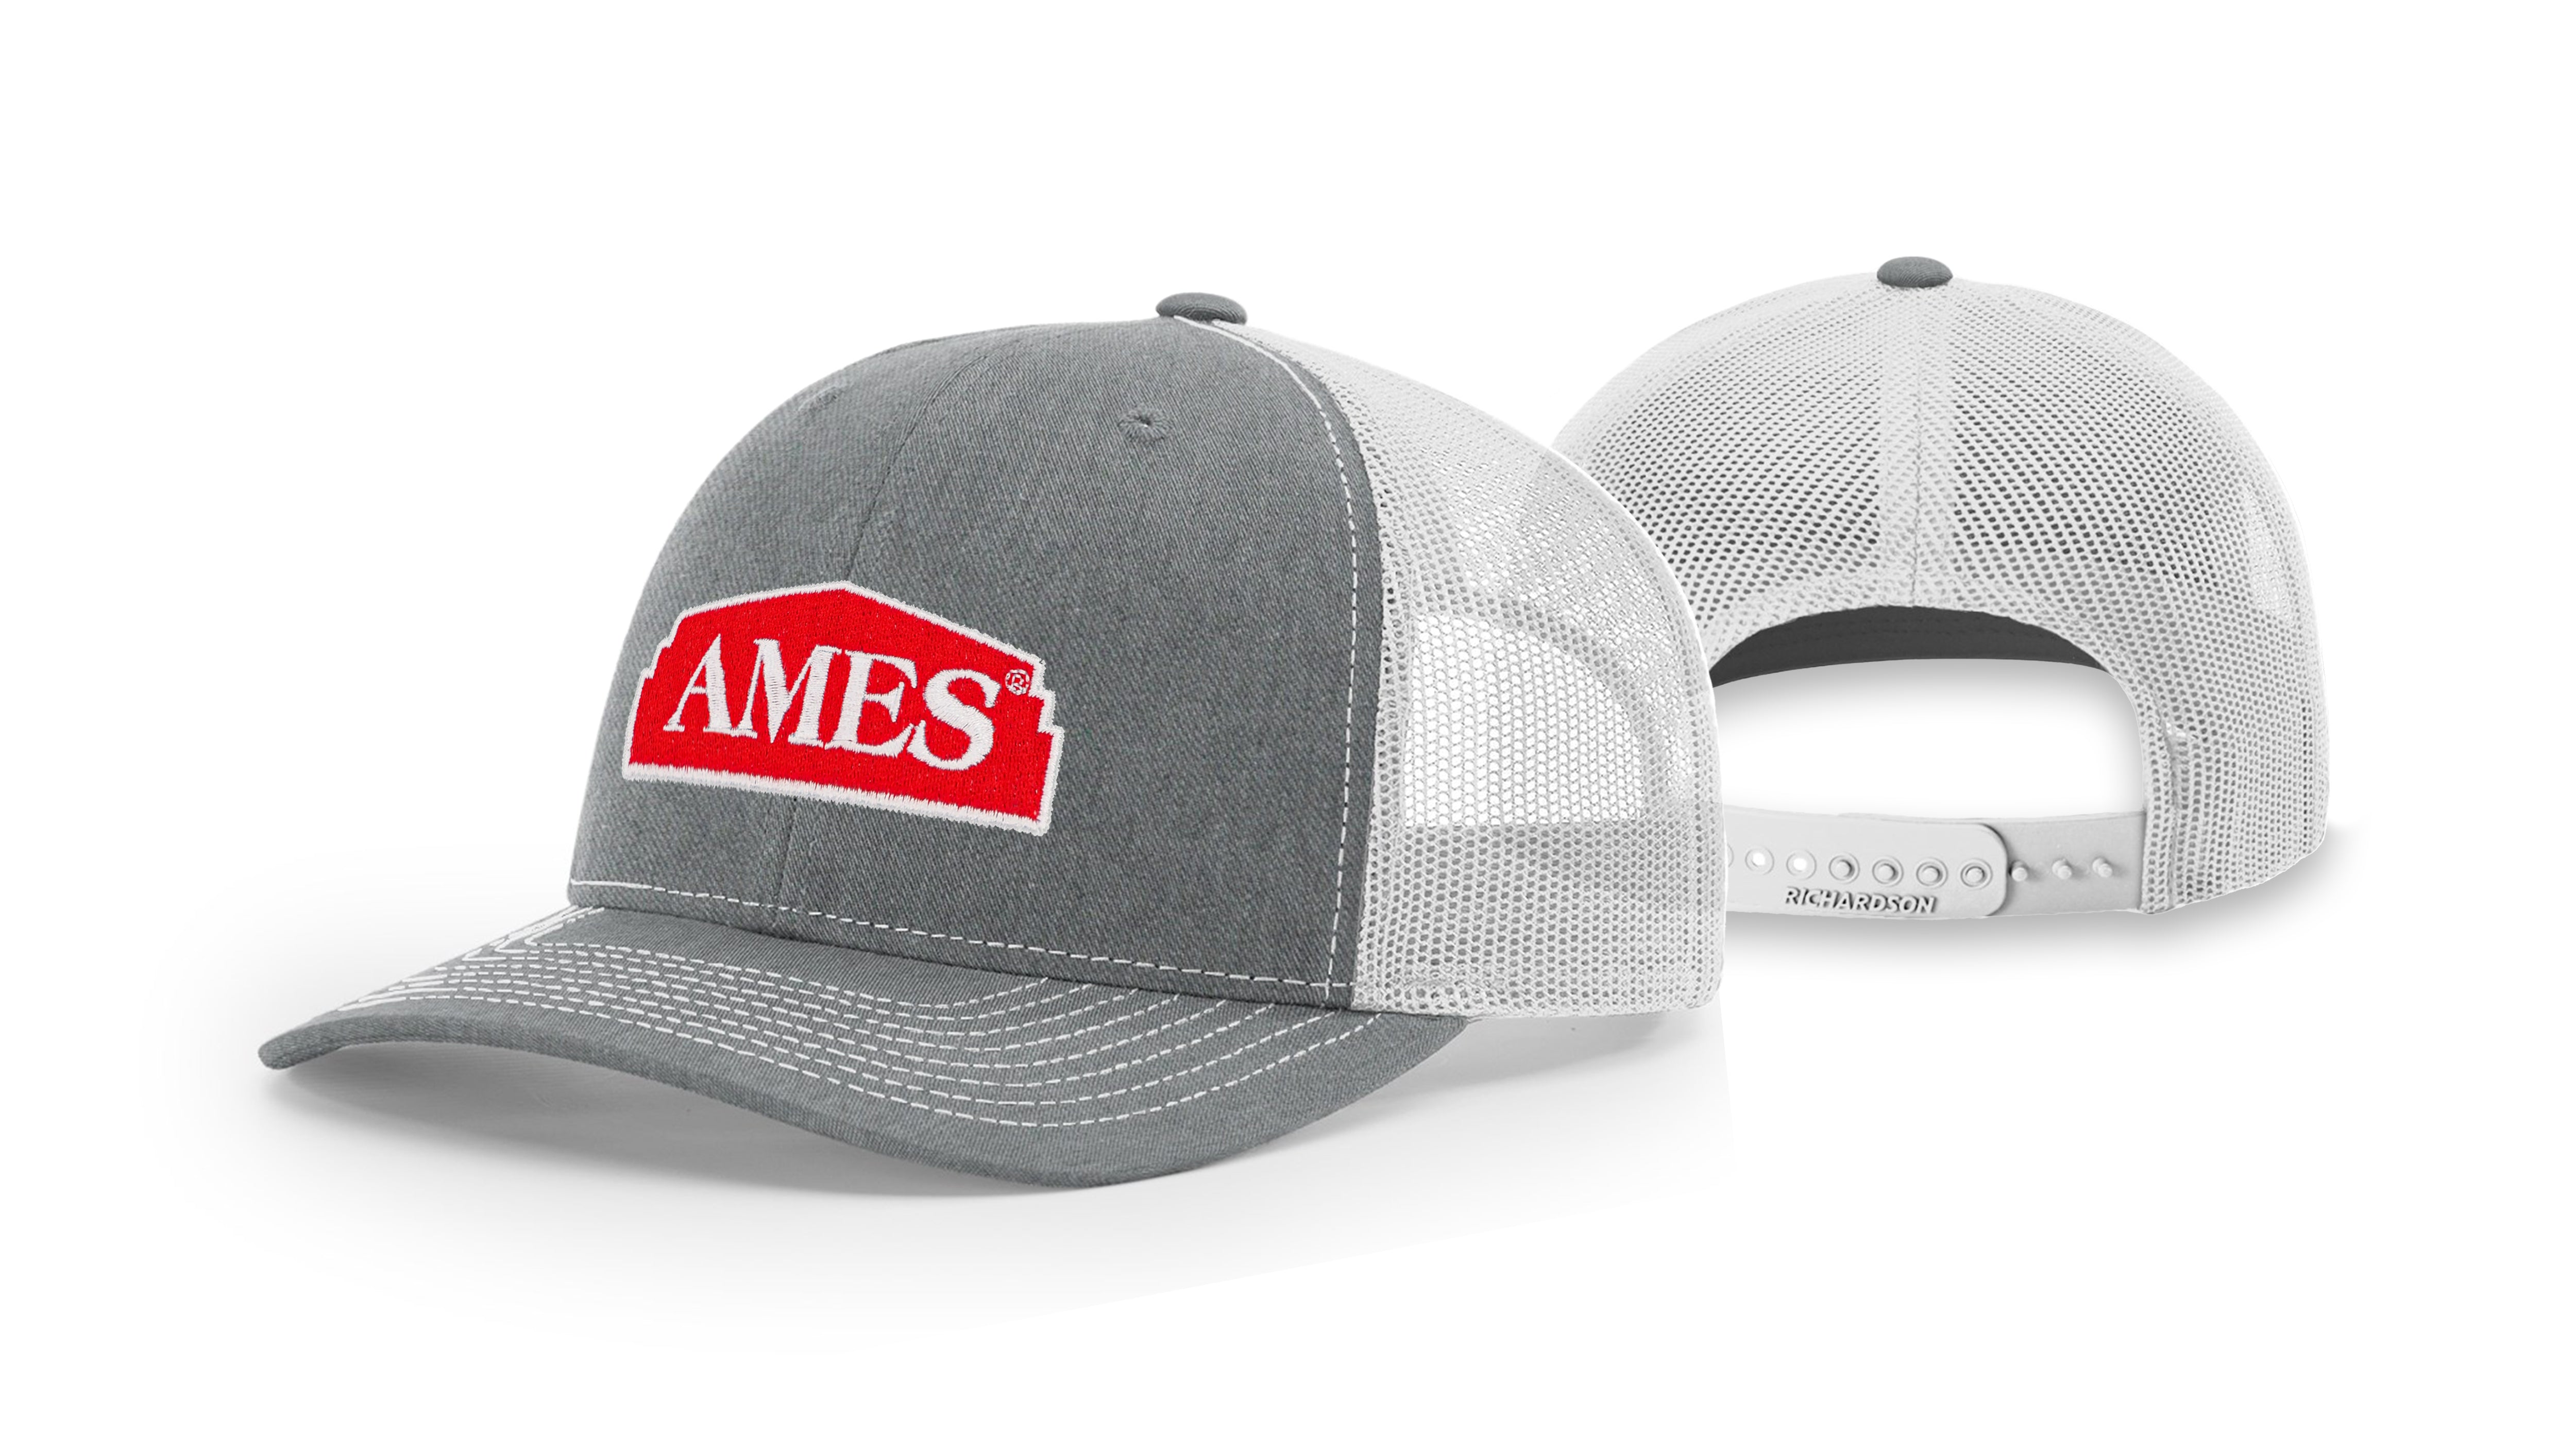 Custom Embroidered Hats, Company Hats With Your Logo